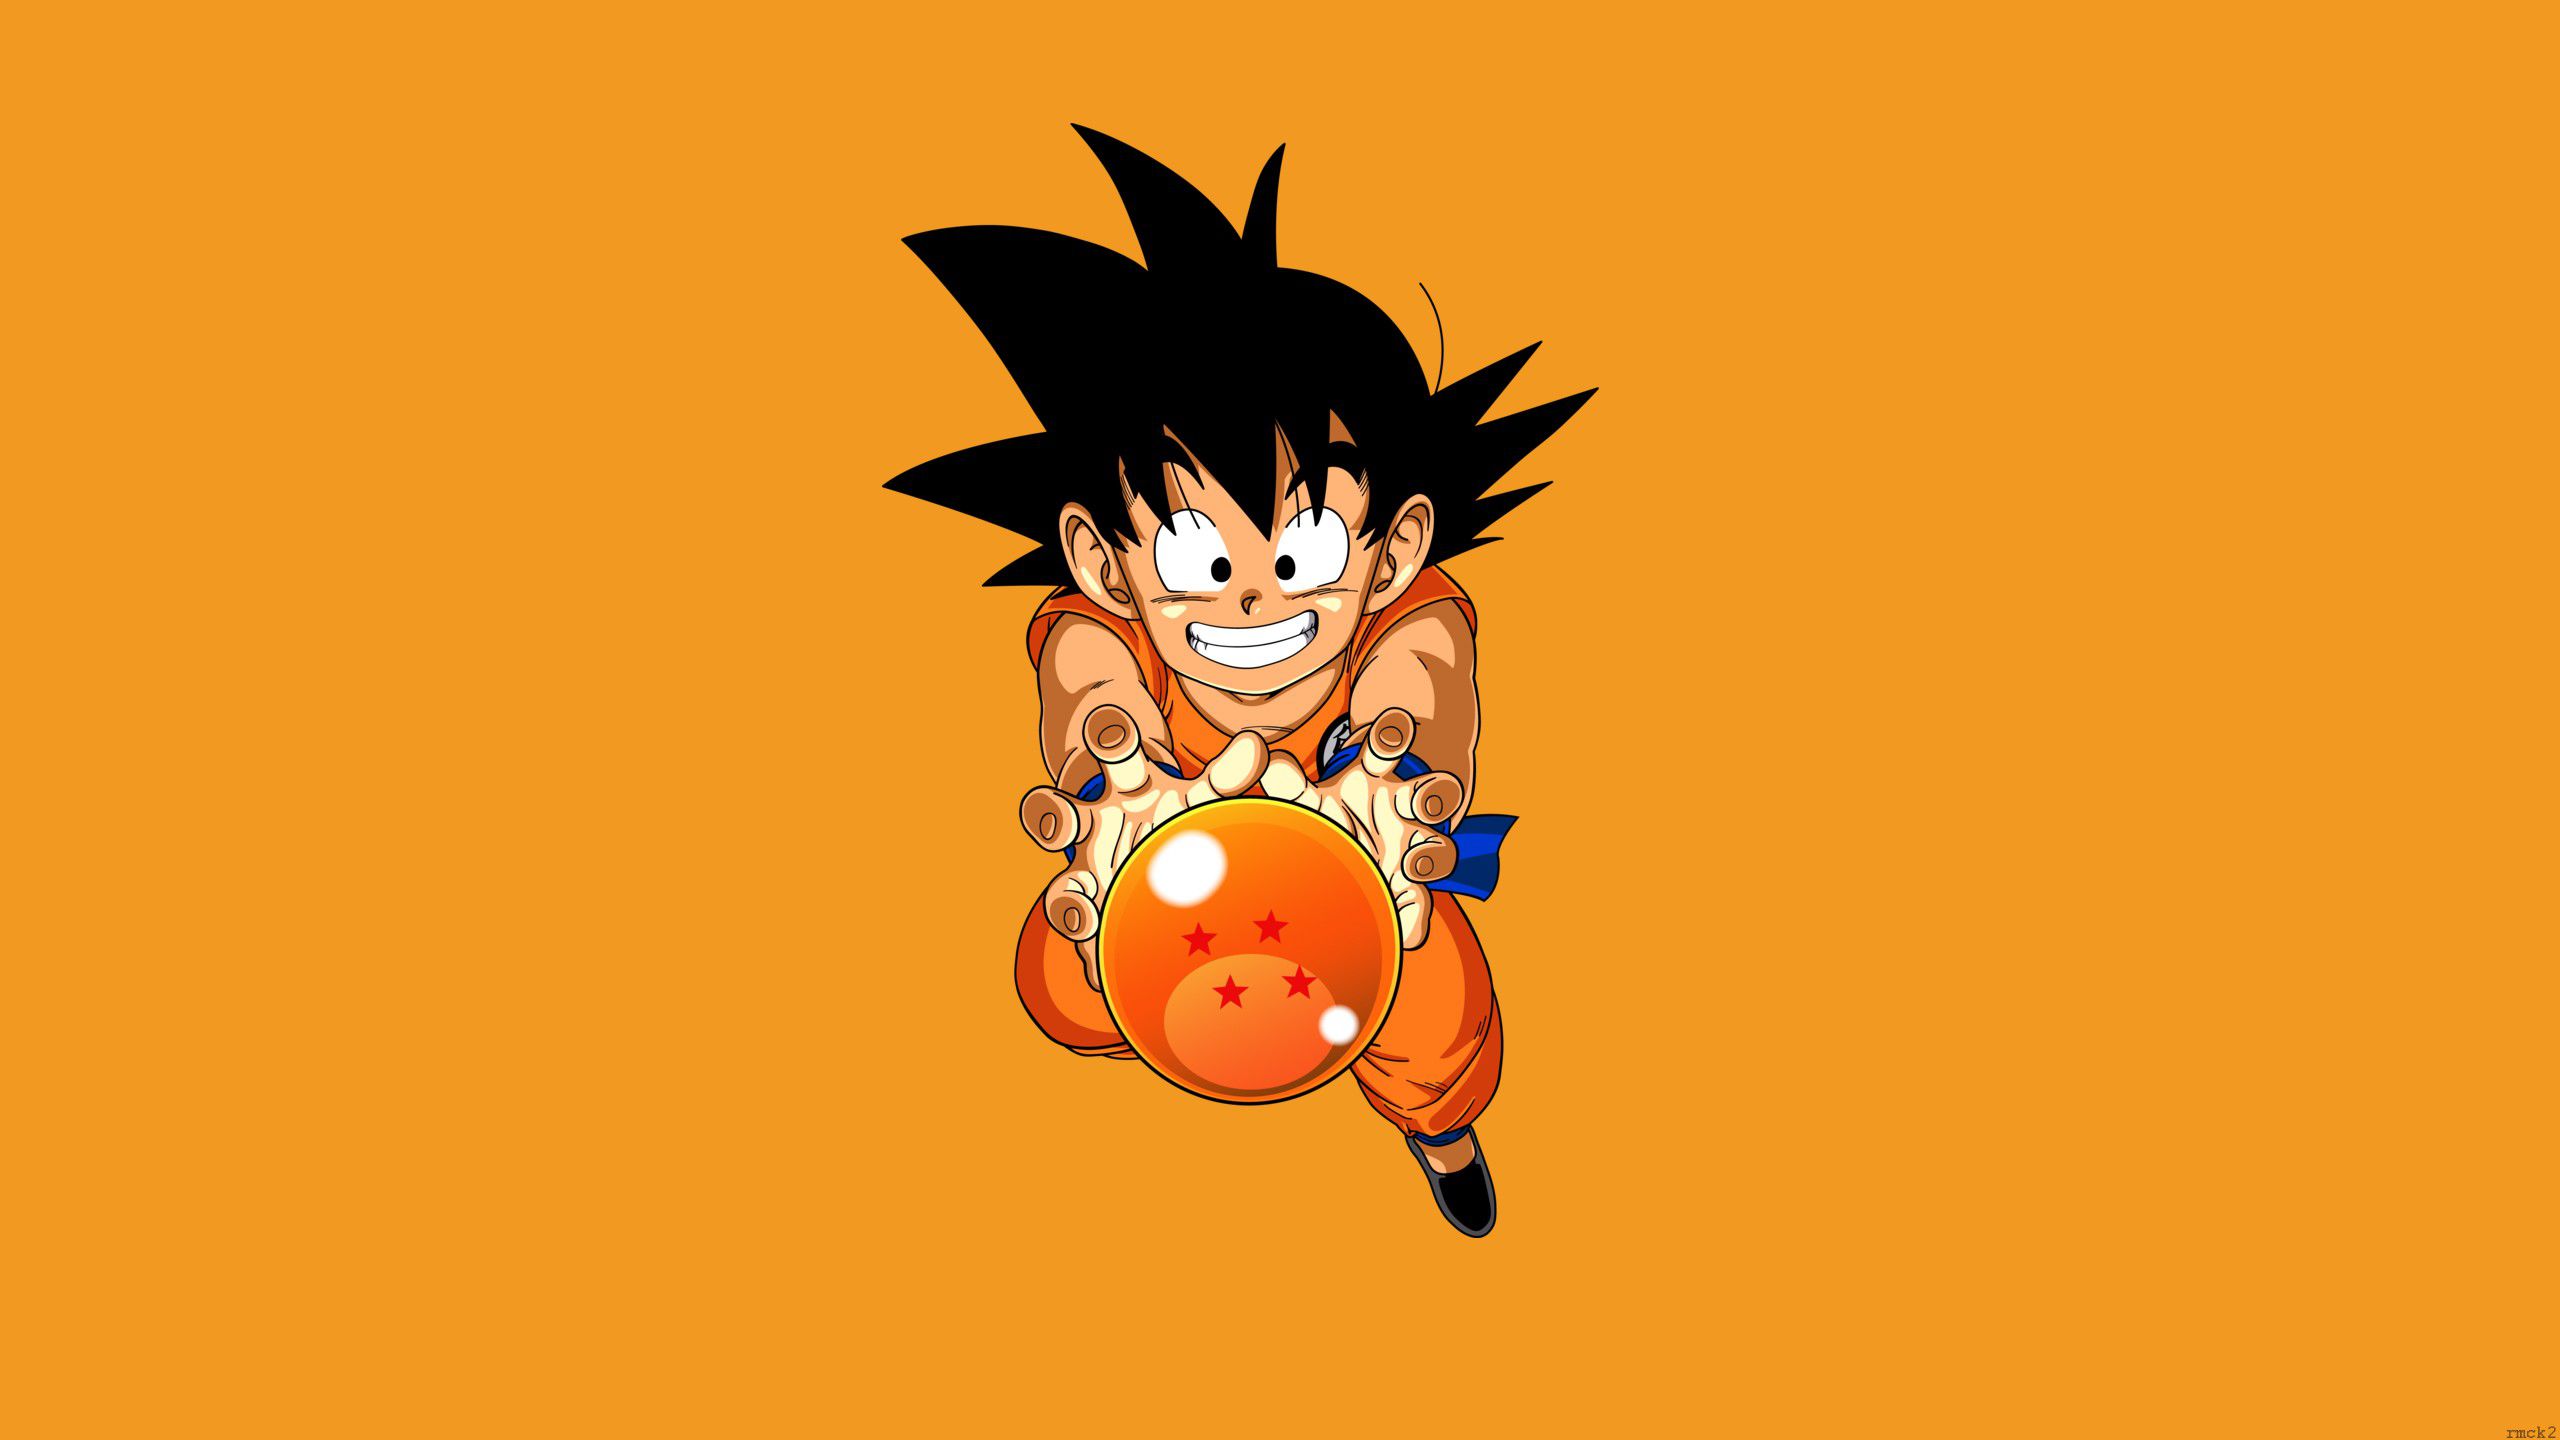 Dragon ball hd wallpapers, hd images, backgrounds